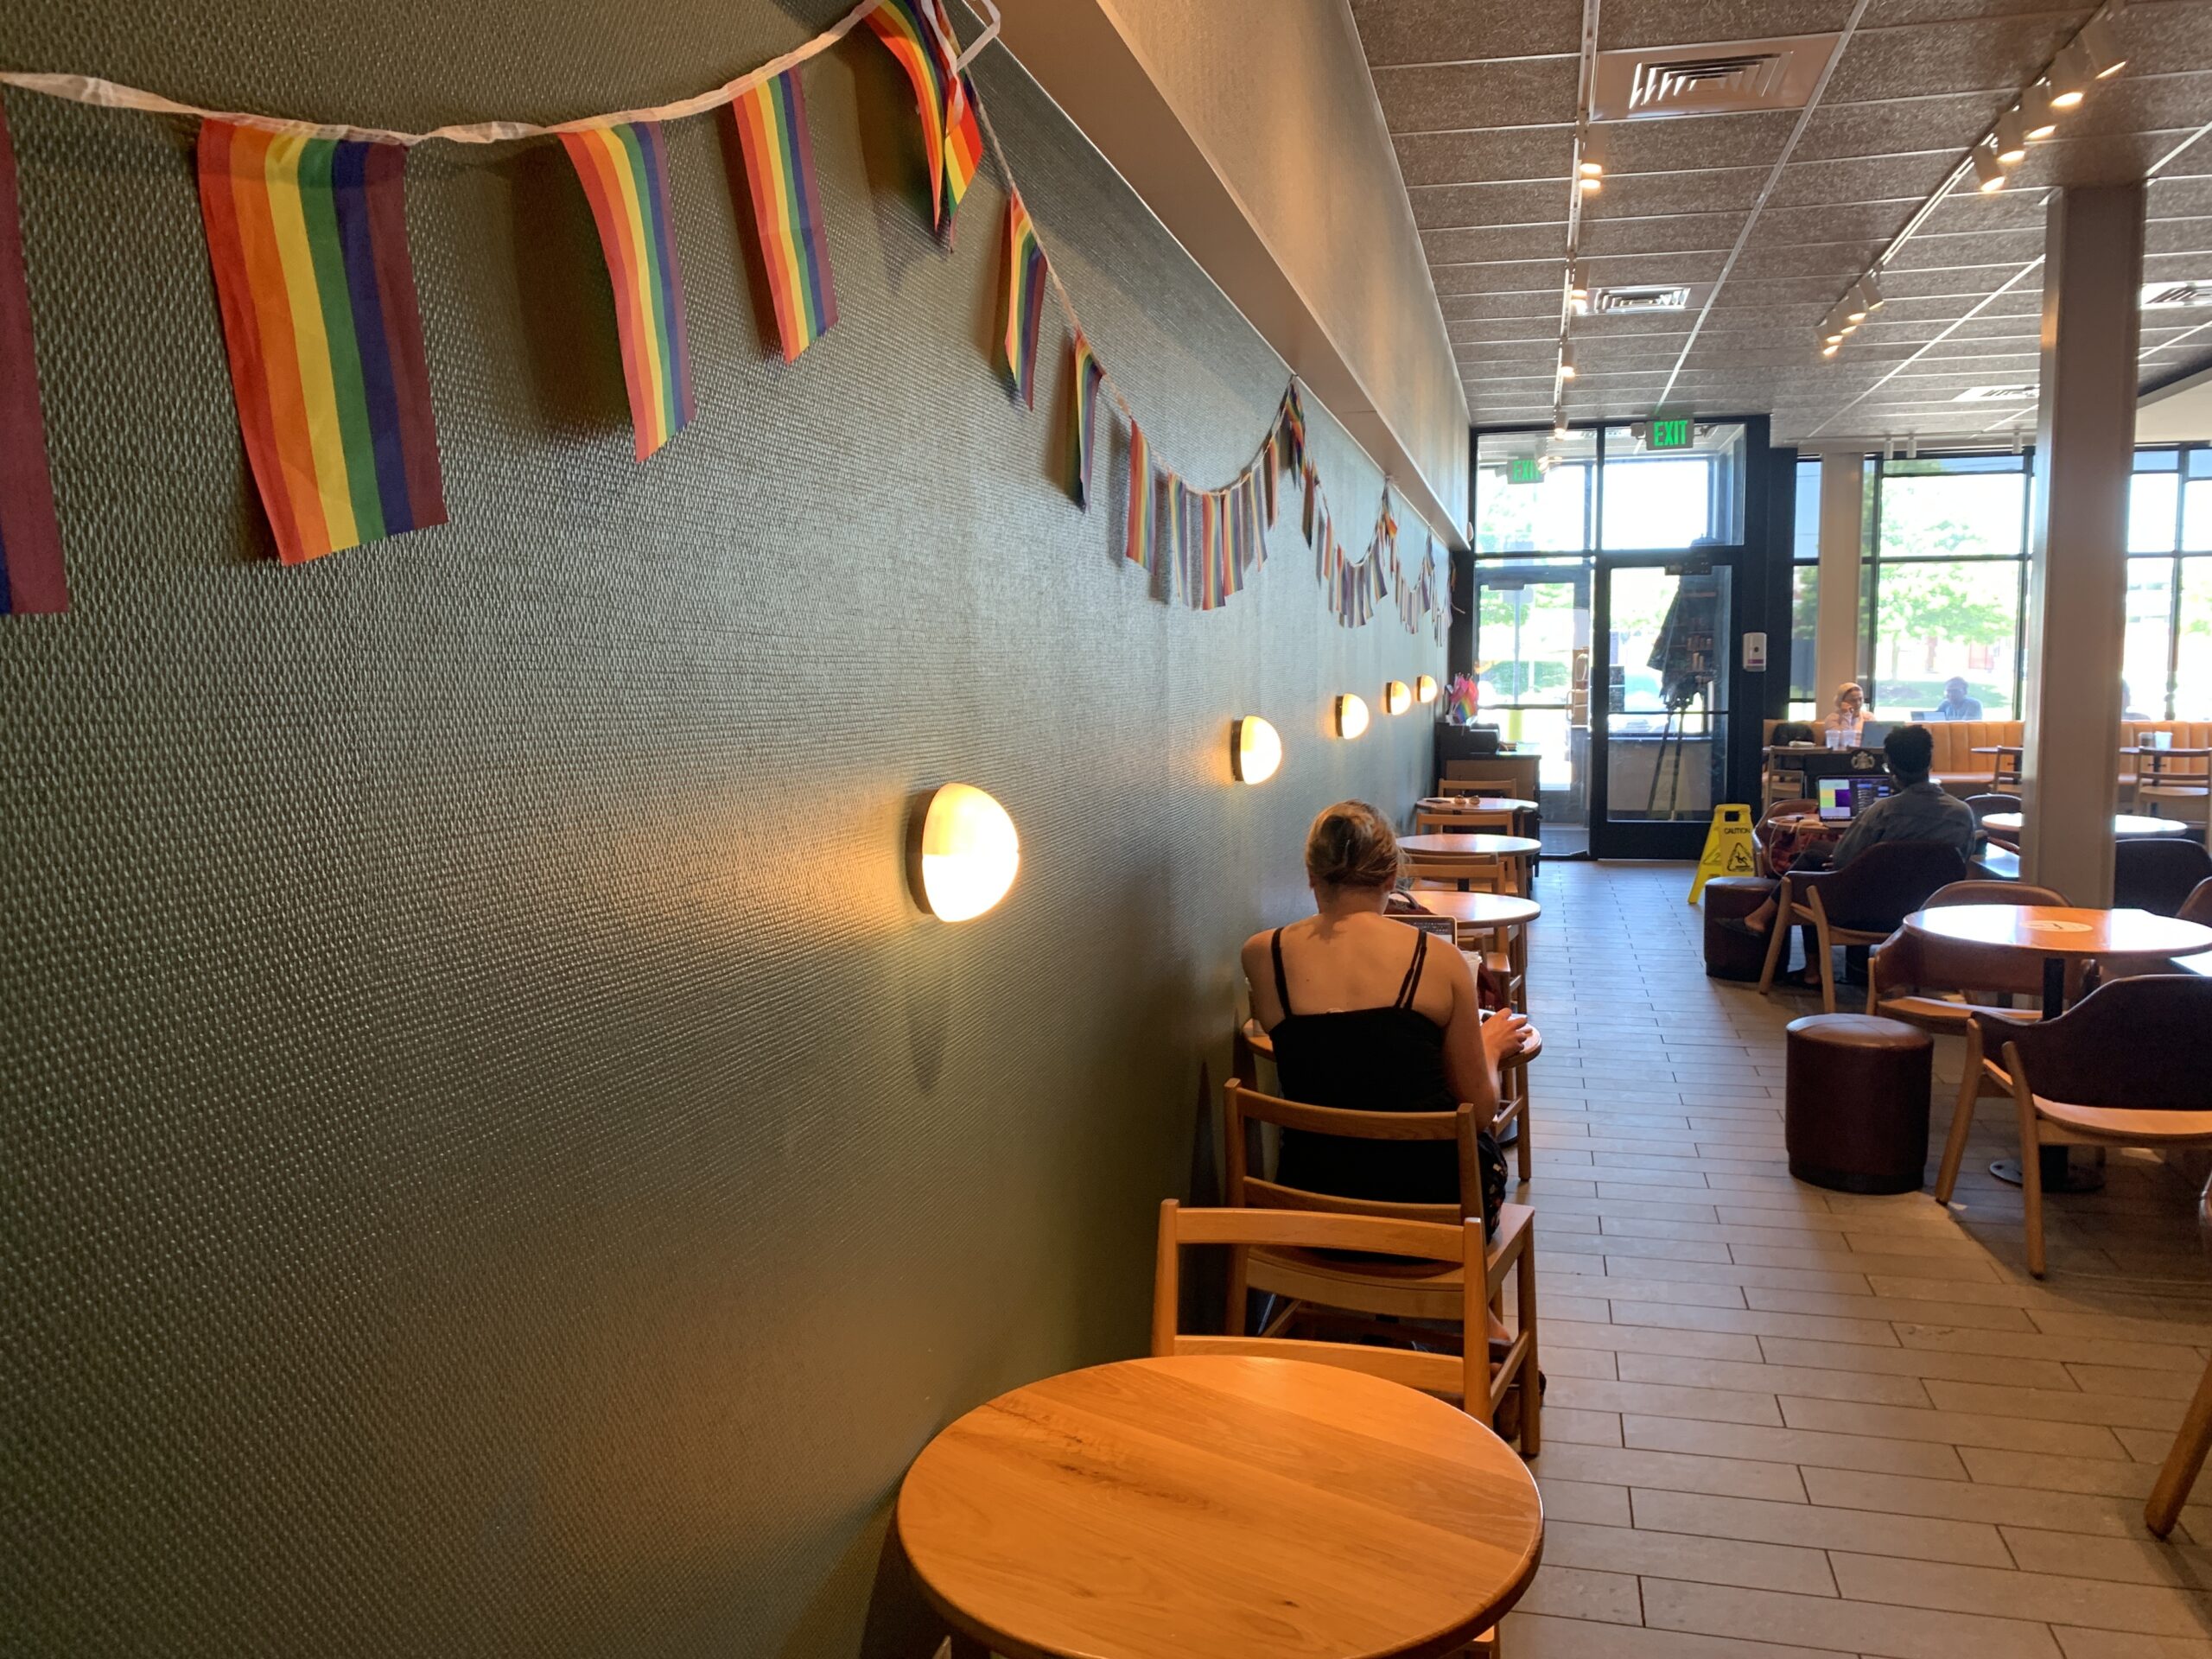 Starbucks on Lake Lansing Road shows pride with flags around the cafe